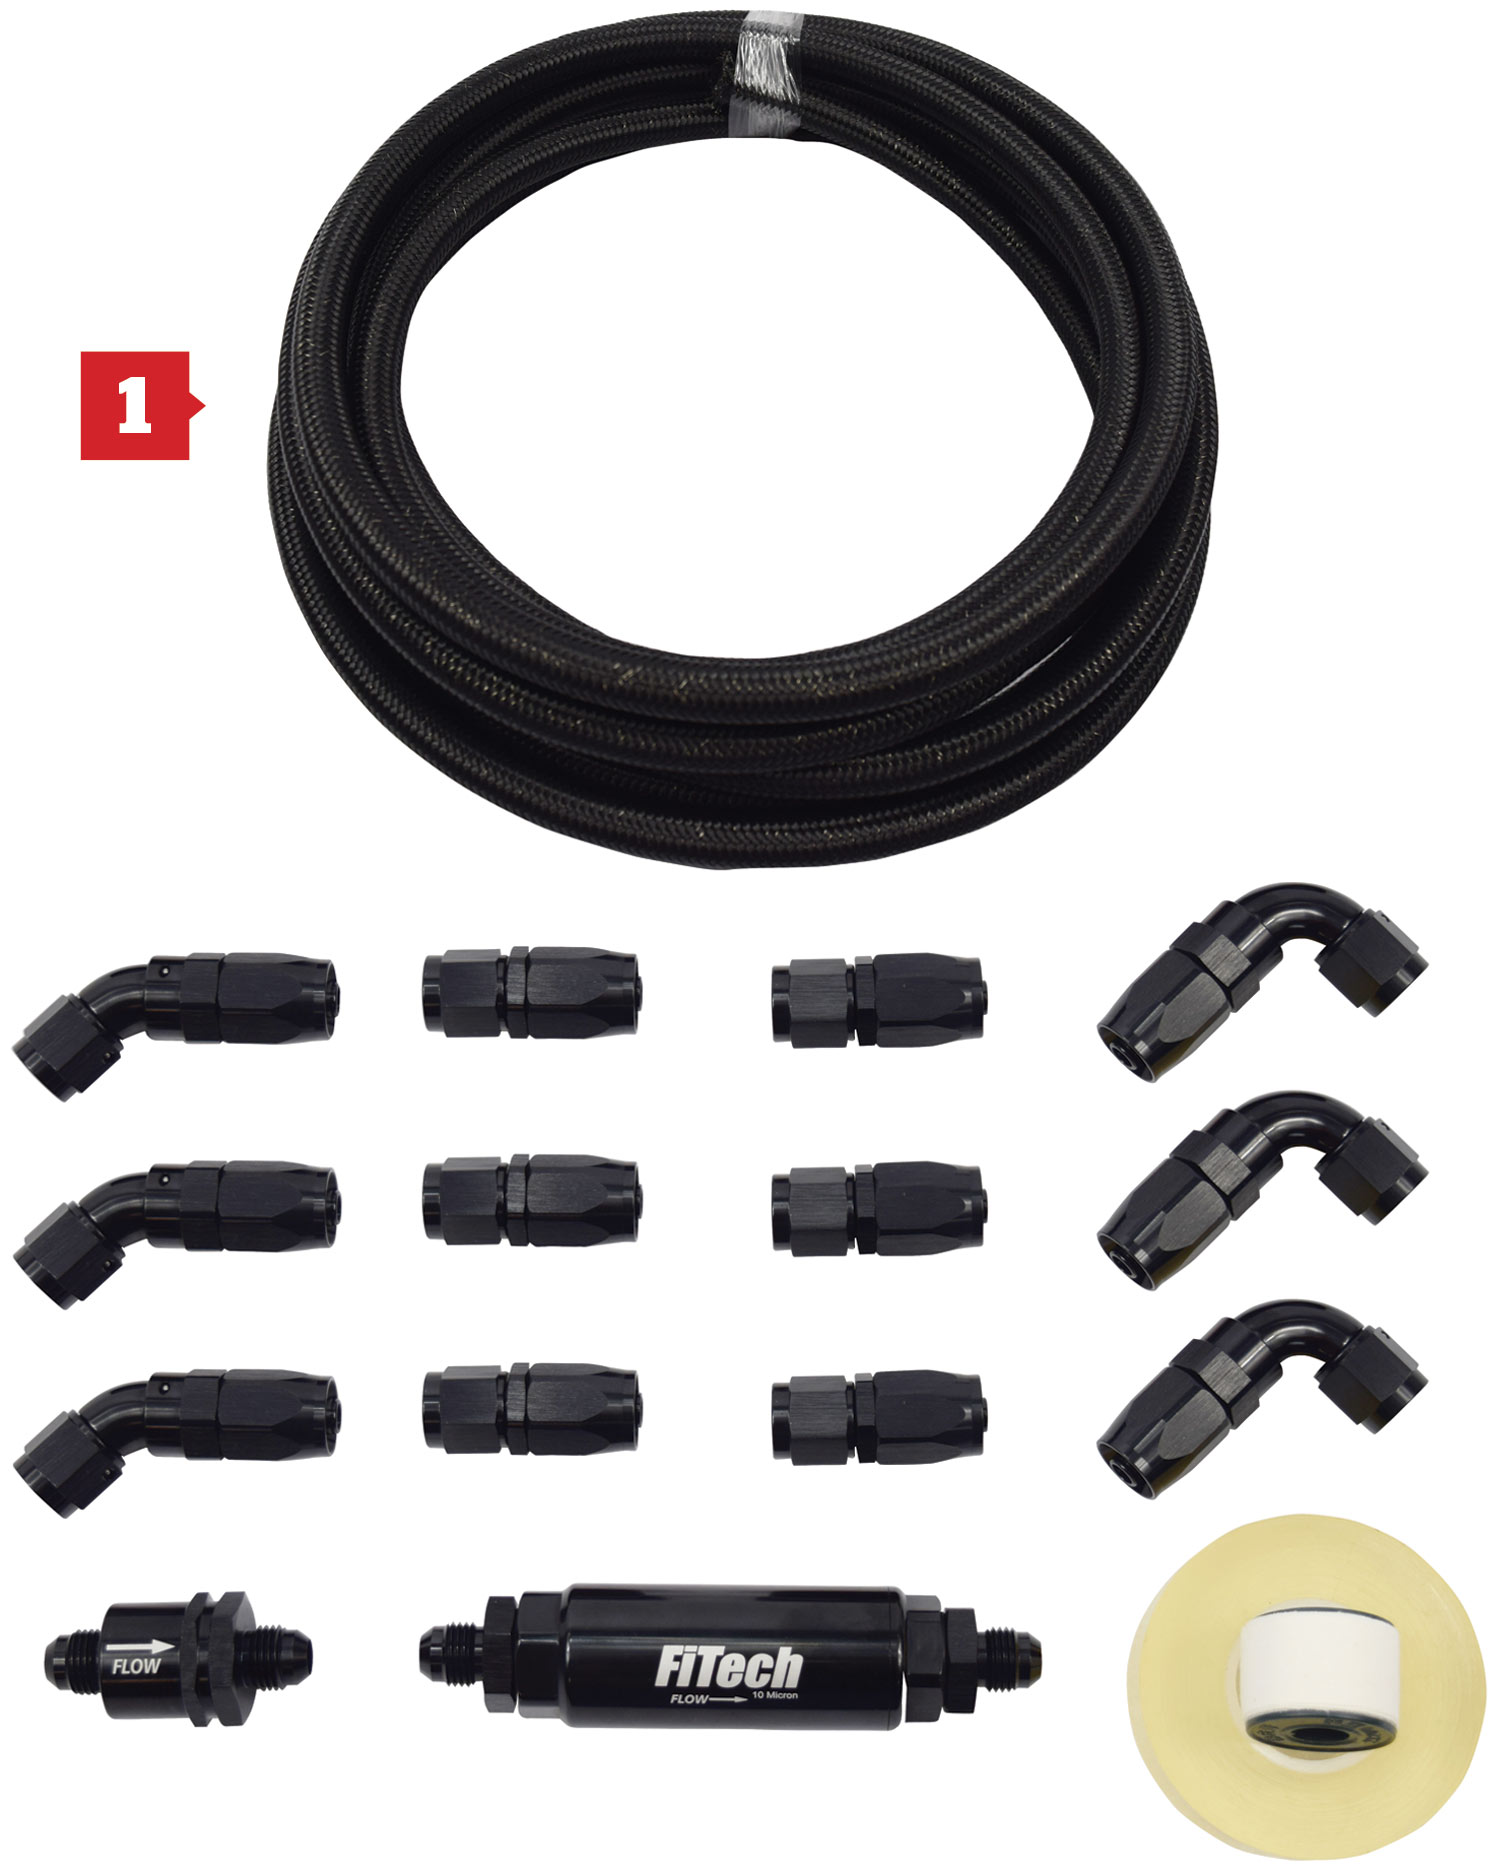 FiTech’s Stainless Braided Fuel Line Kit